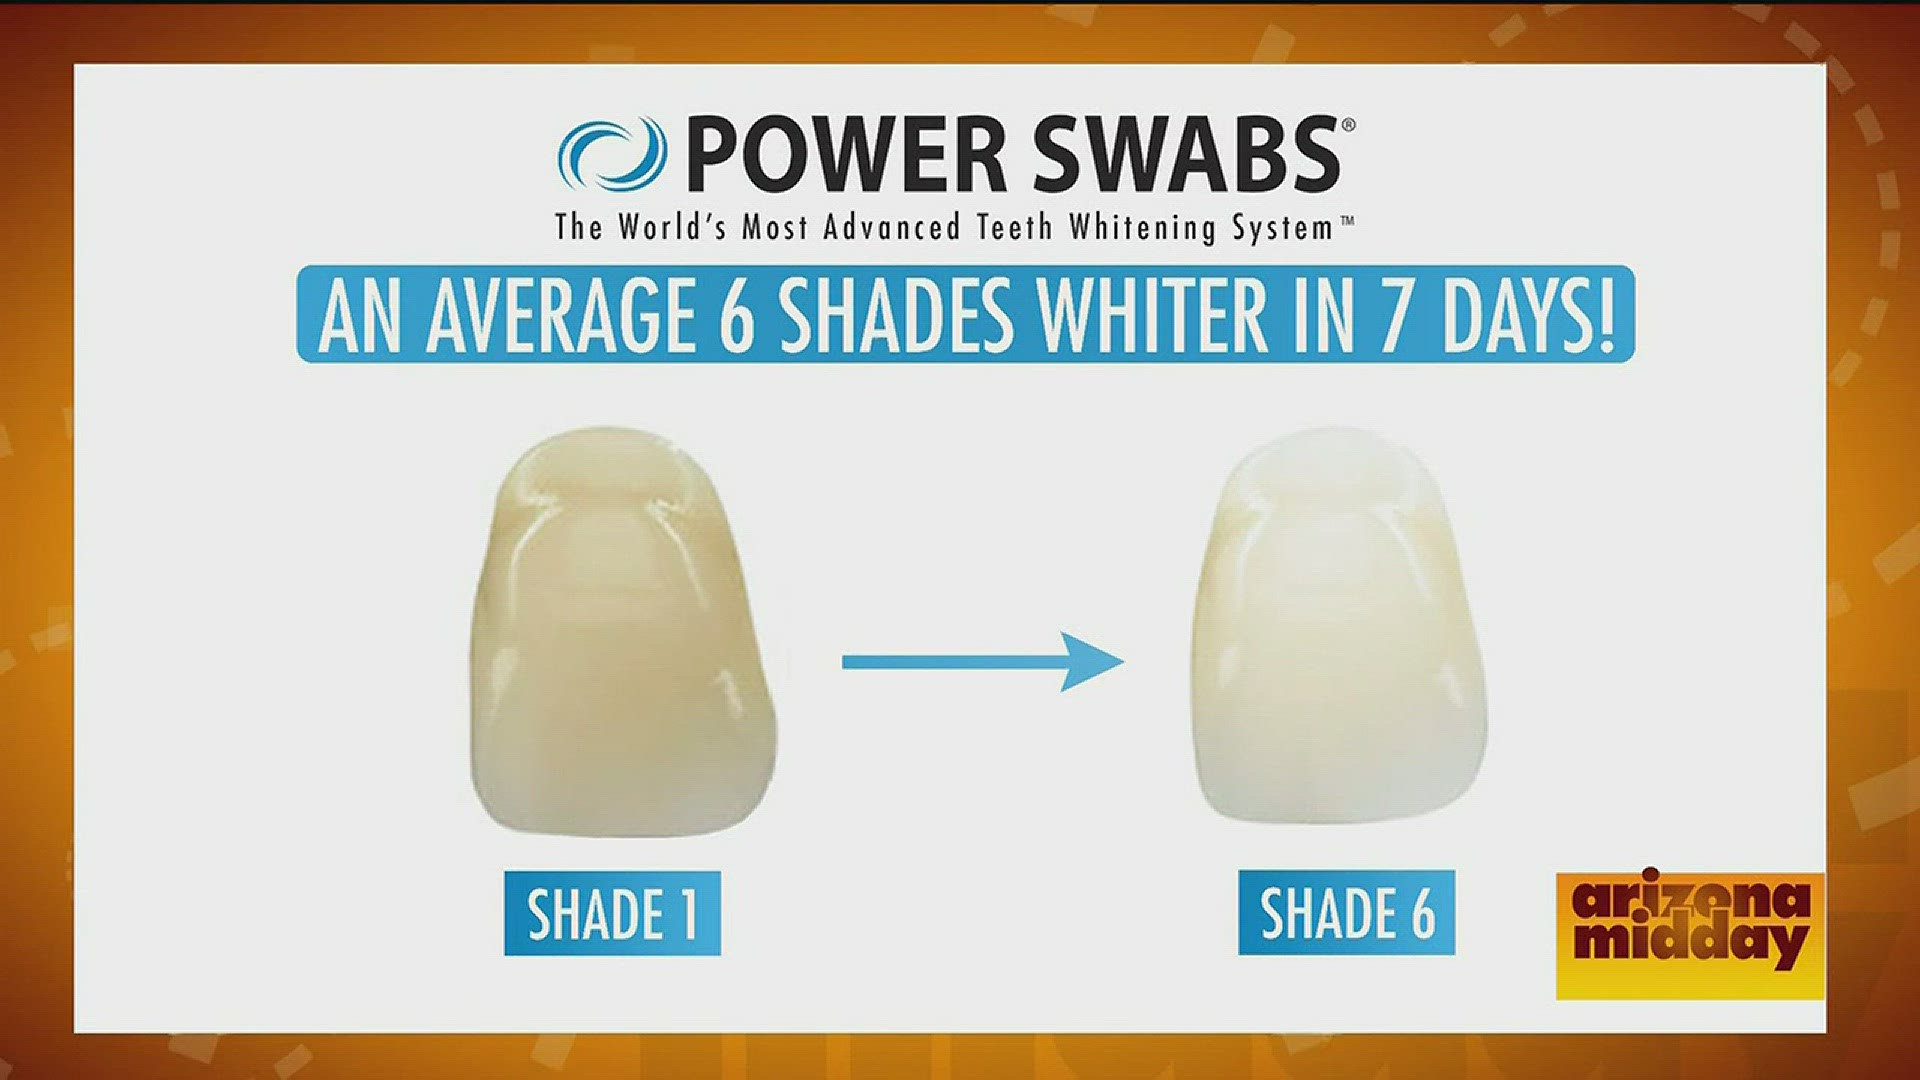 Powerswabs shares how you can get a bright white smile and instantly change your appearance!